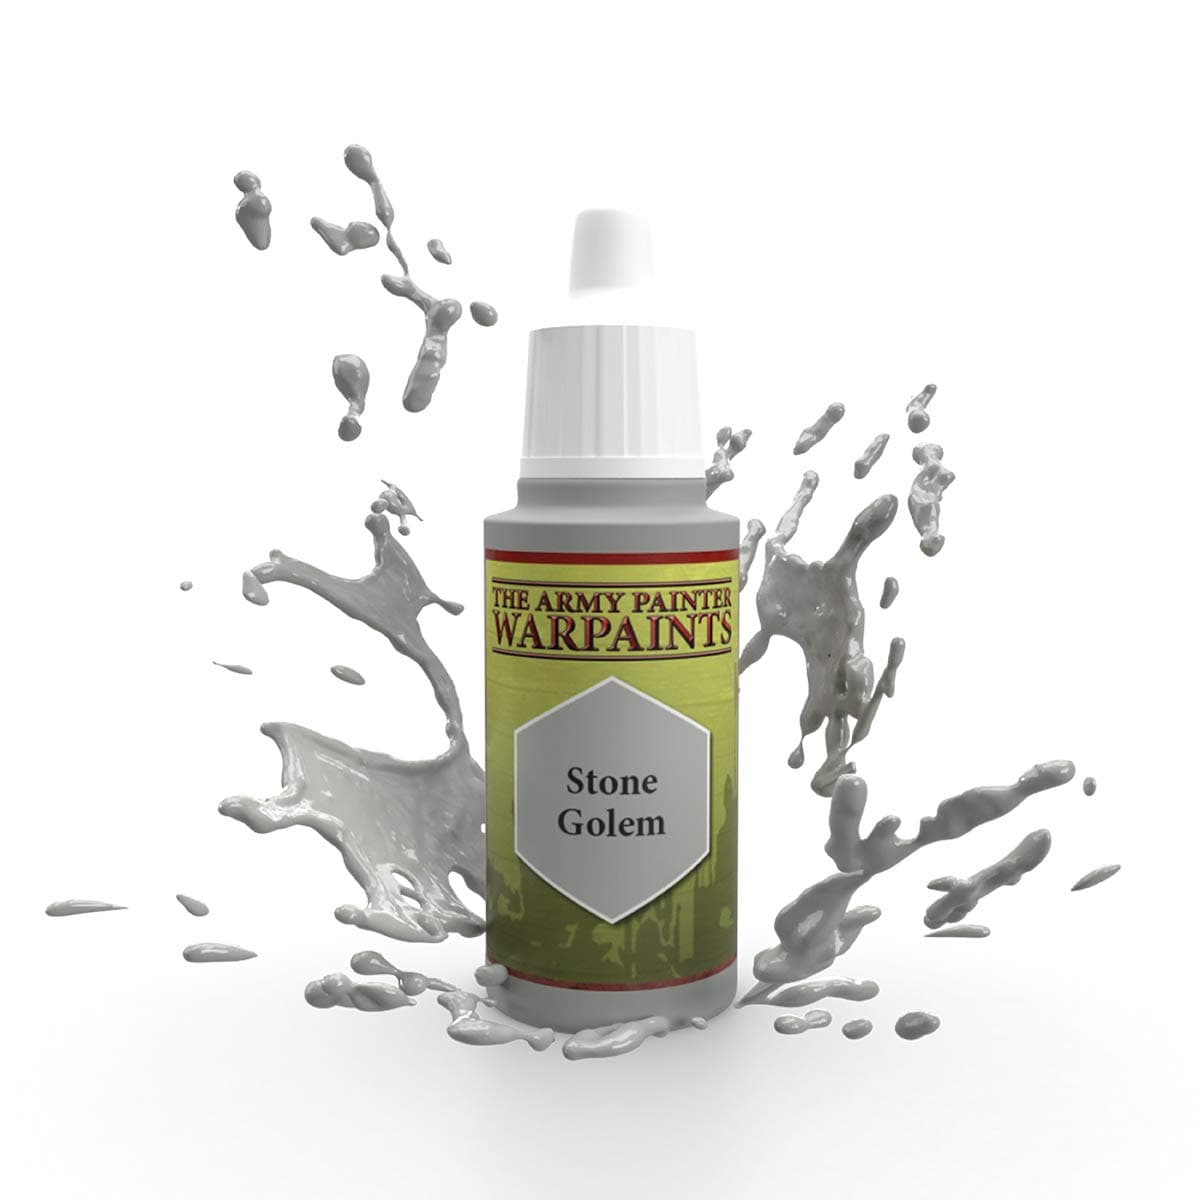 The Army Painter Accessories The Army Painter Warpaints: Stone Golem 18ml